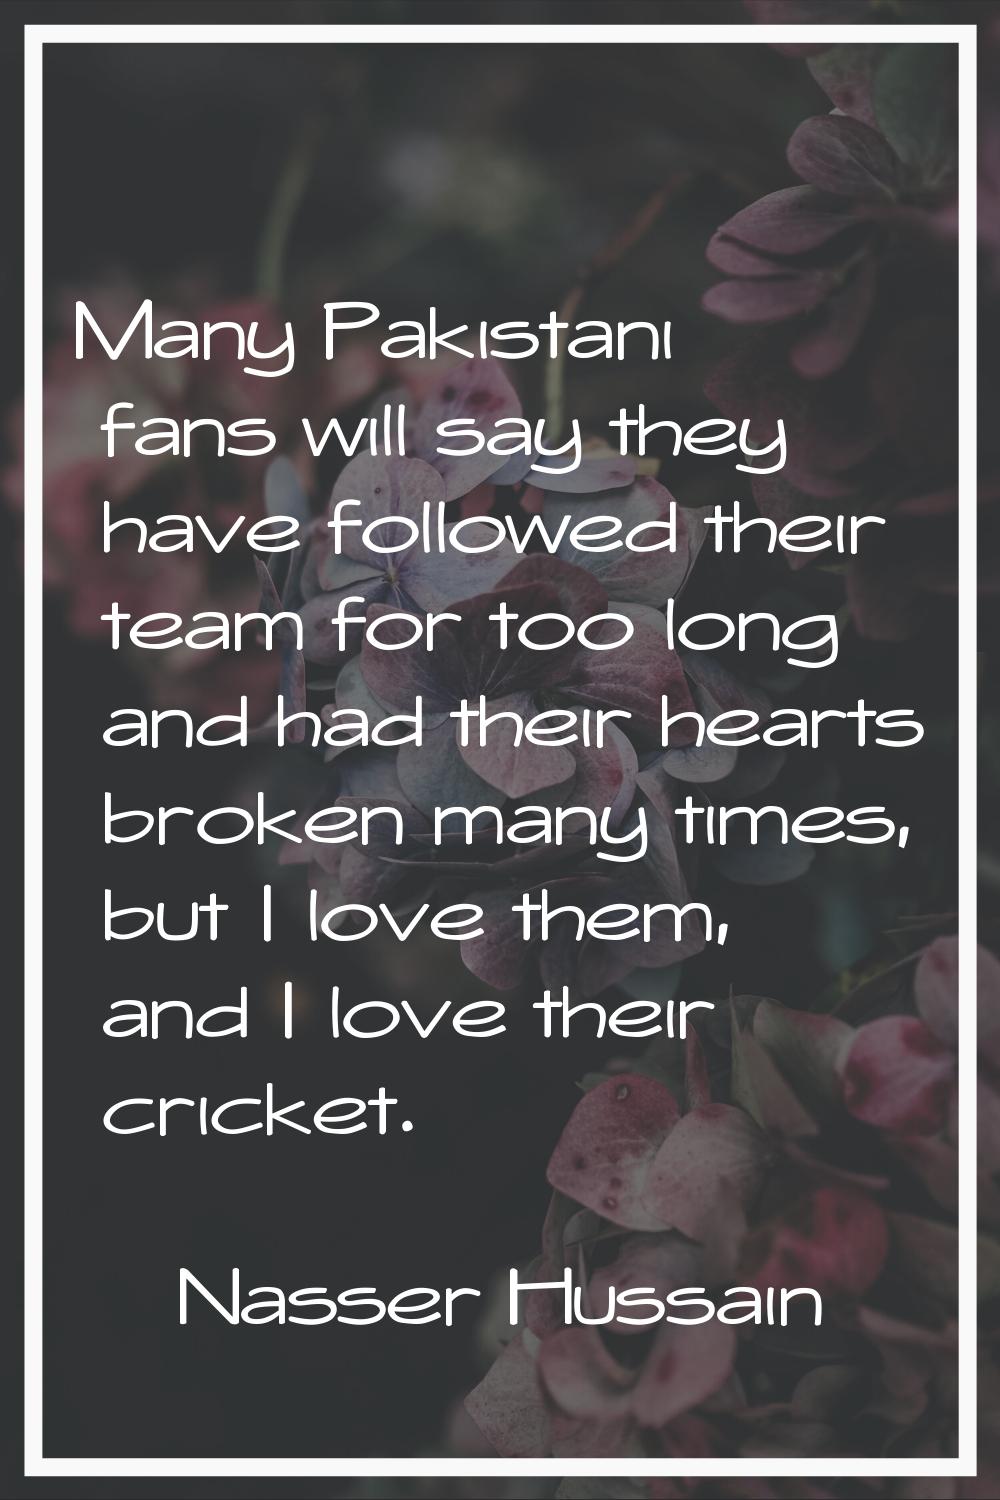 Many Pakistani fans will say they have followed their team for too long and had their hearts broken